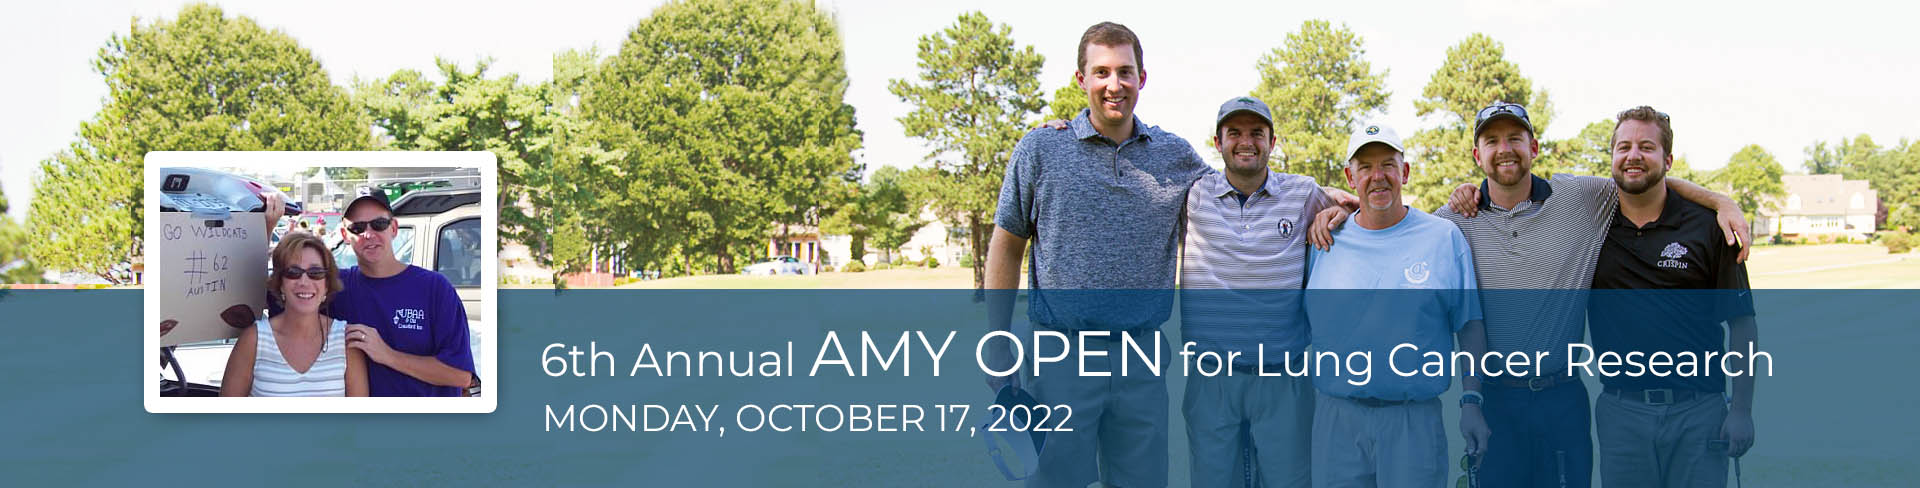 6th Annual Amy Open